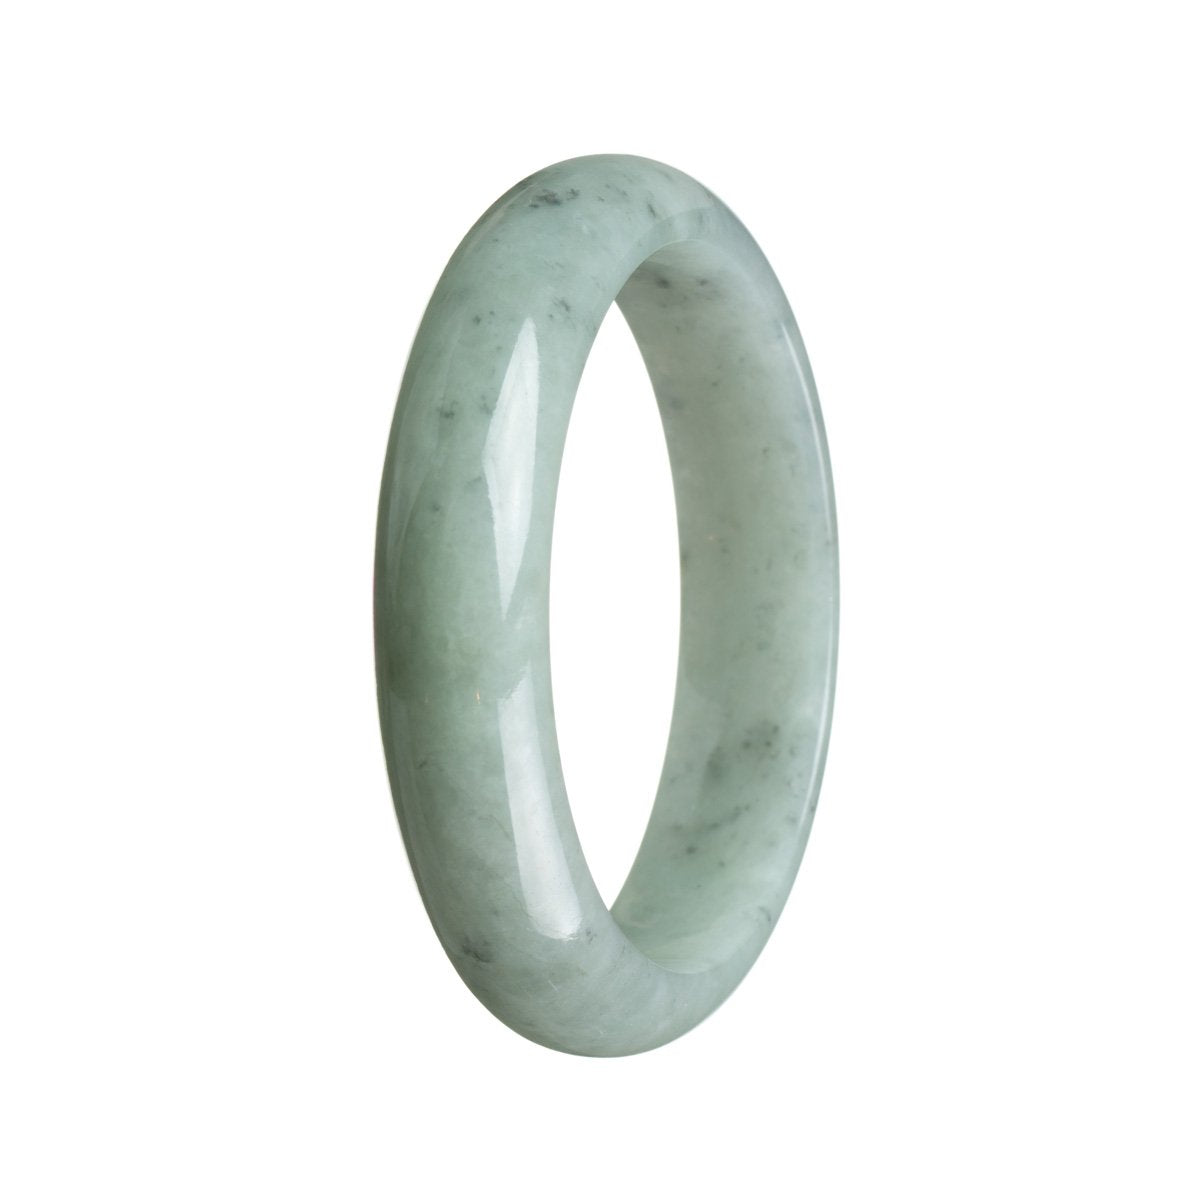 A half moon shaped, 59mm authentic natural grey jade bracelet, skillfully crafted by MAYS GEMS.